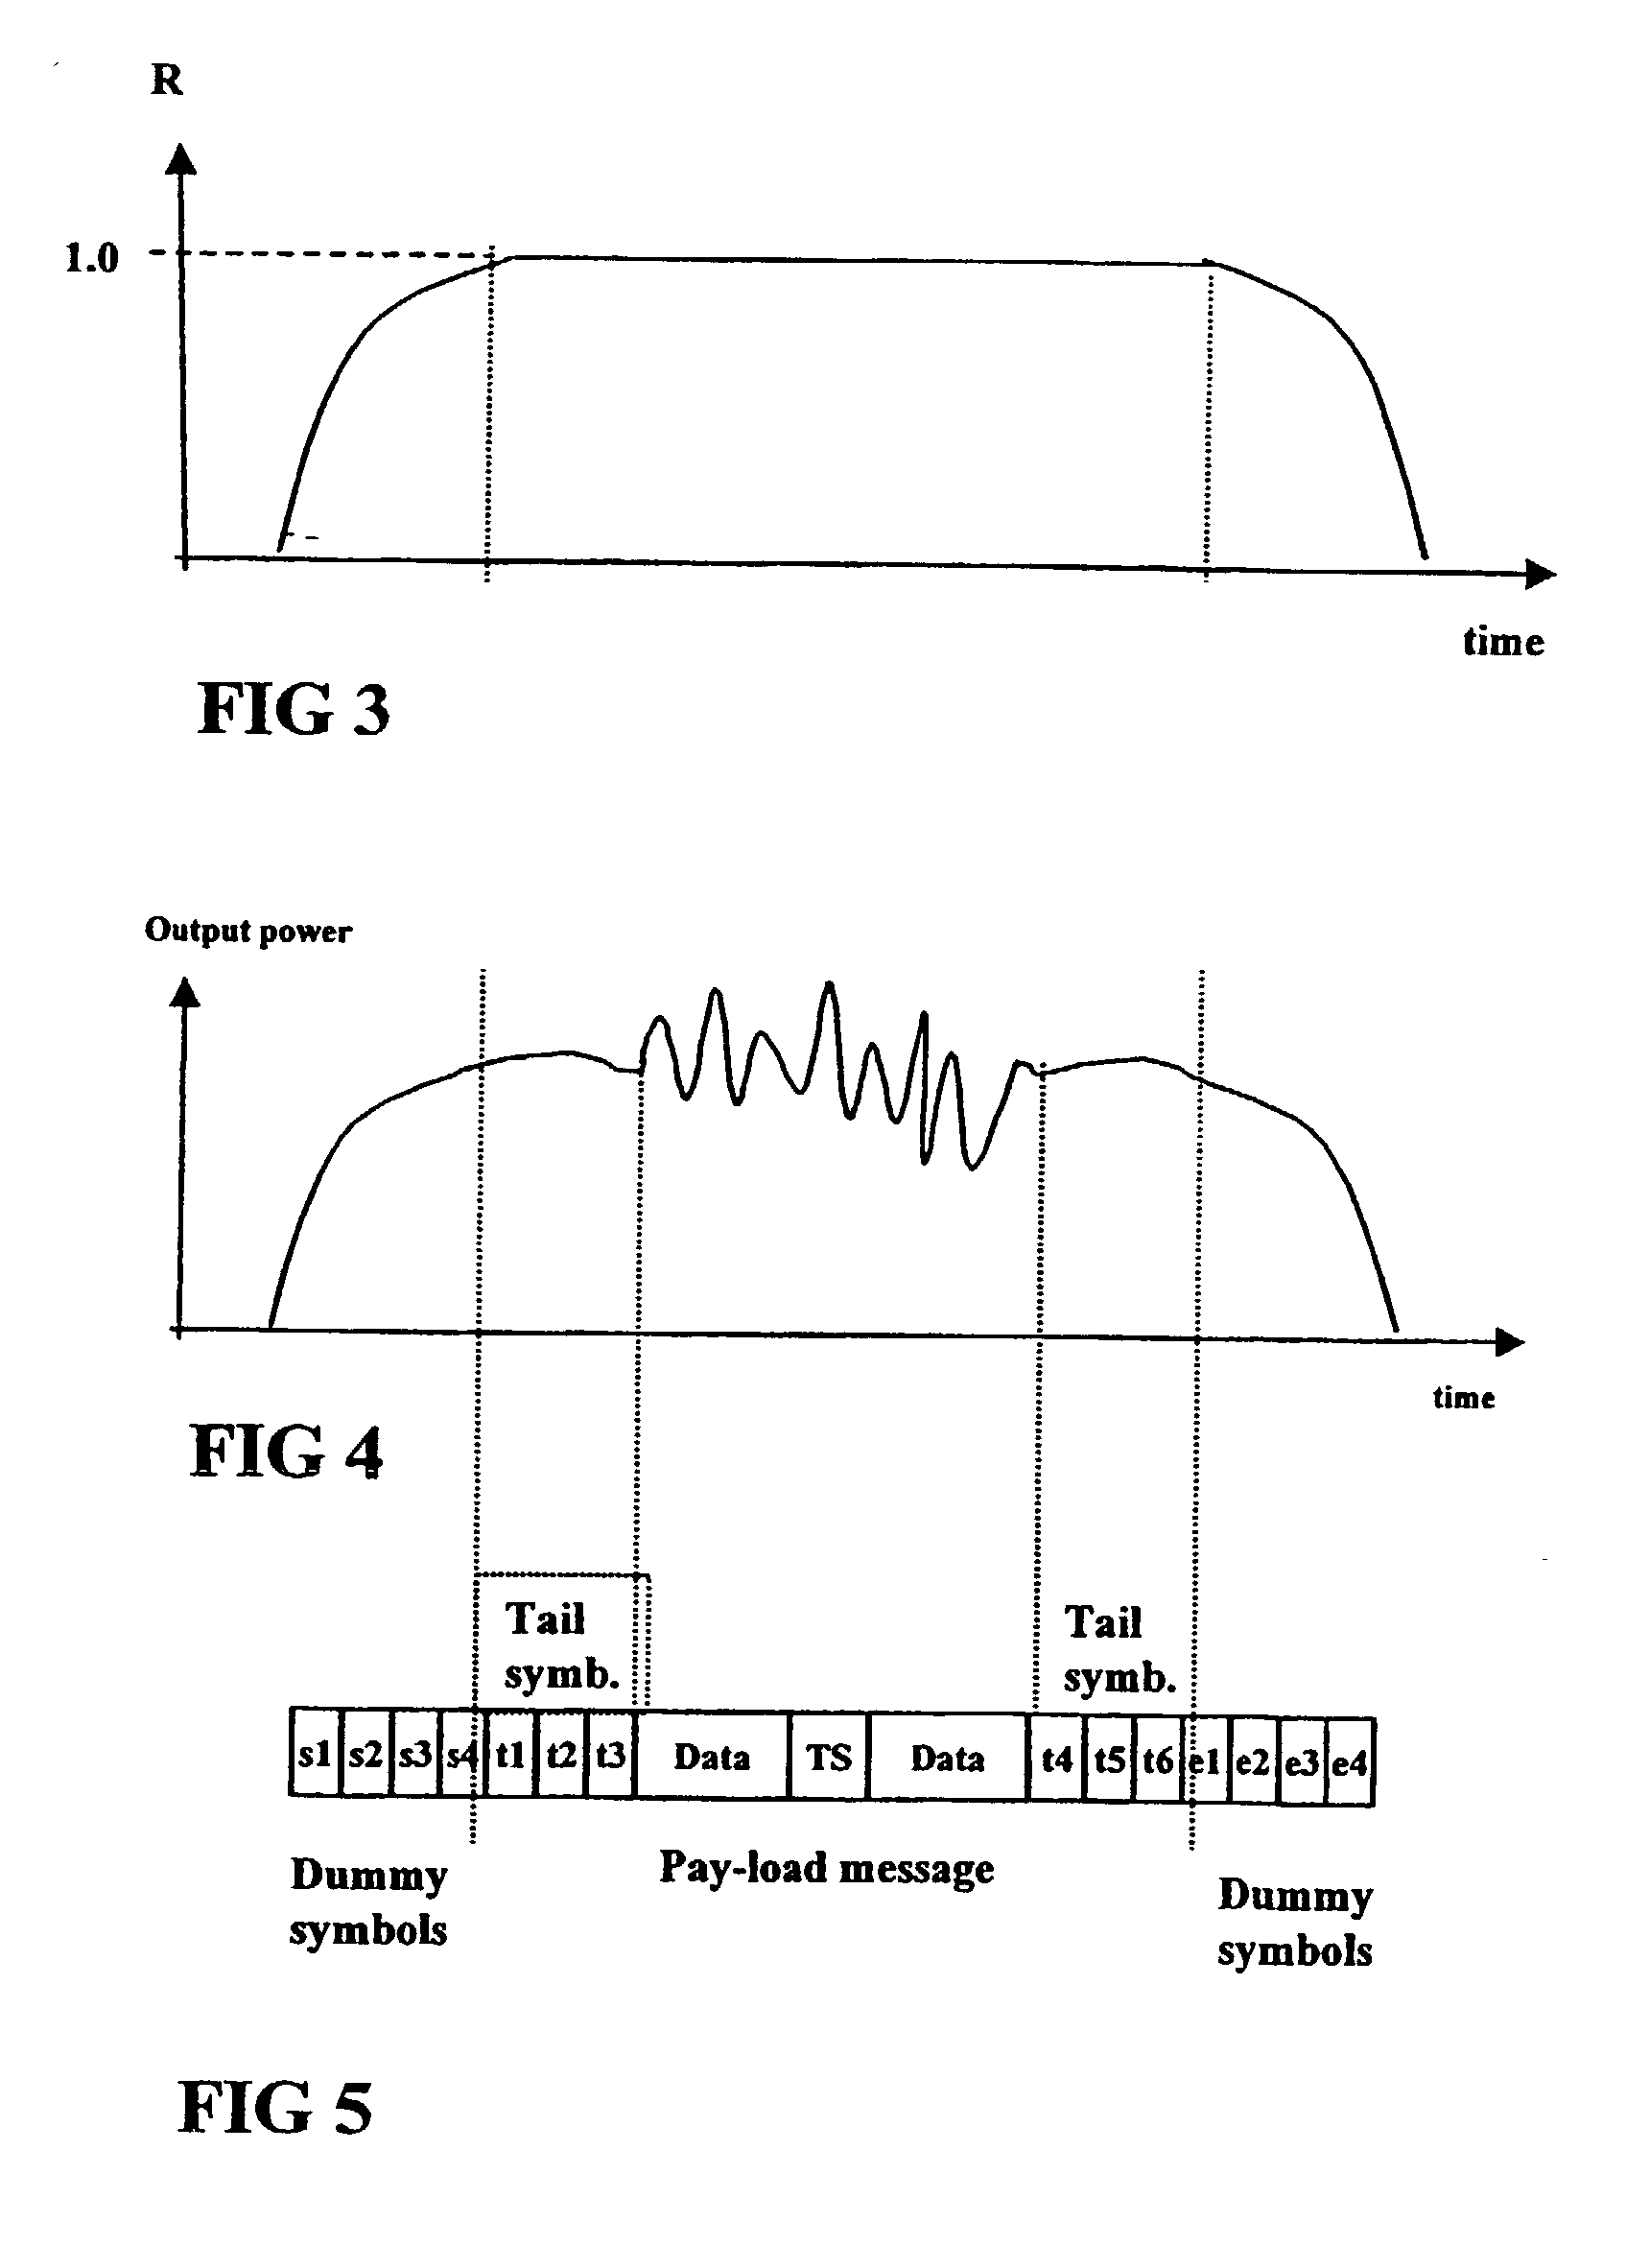 Power characteristic of a radio transmitter